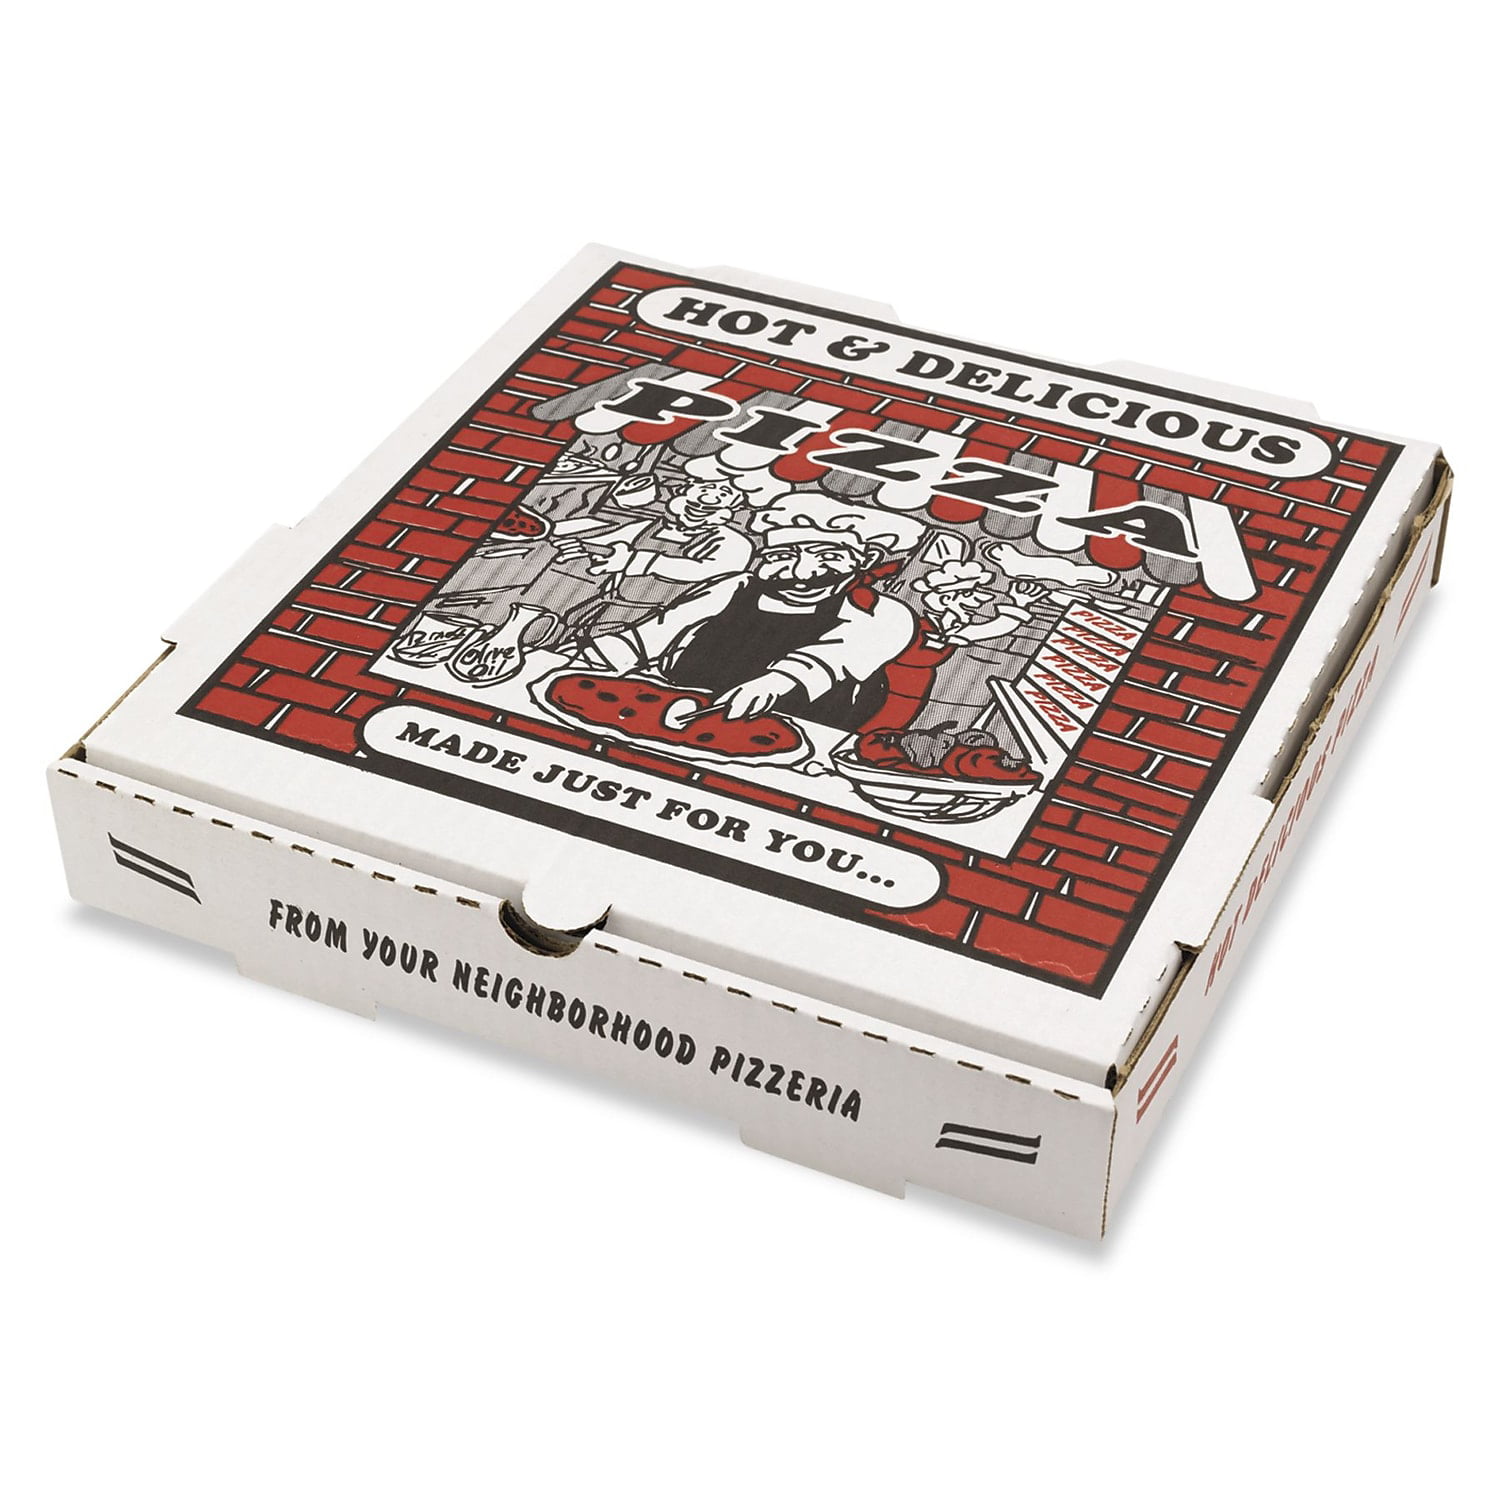 GreenBox Corrugated Recycled Pizza Boxes - 12 Box (50/Bundle)